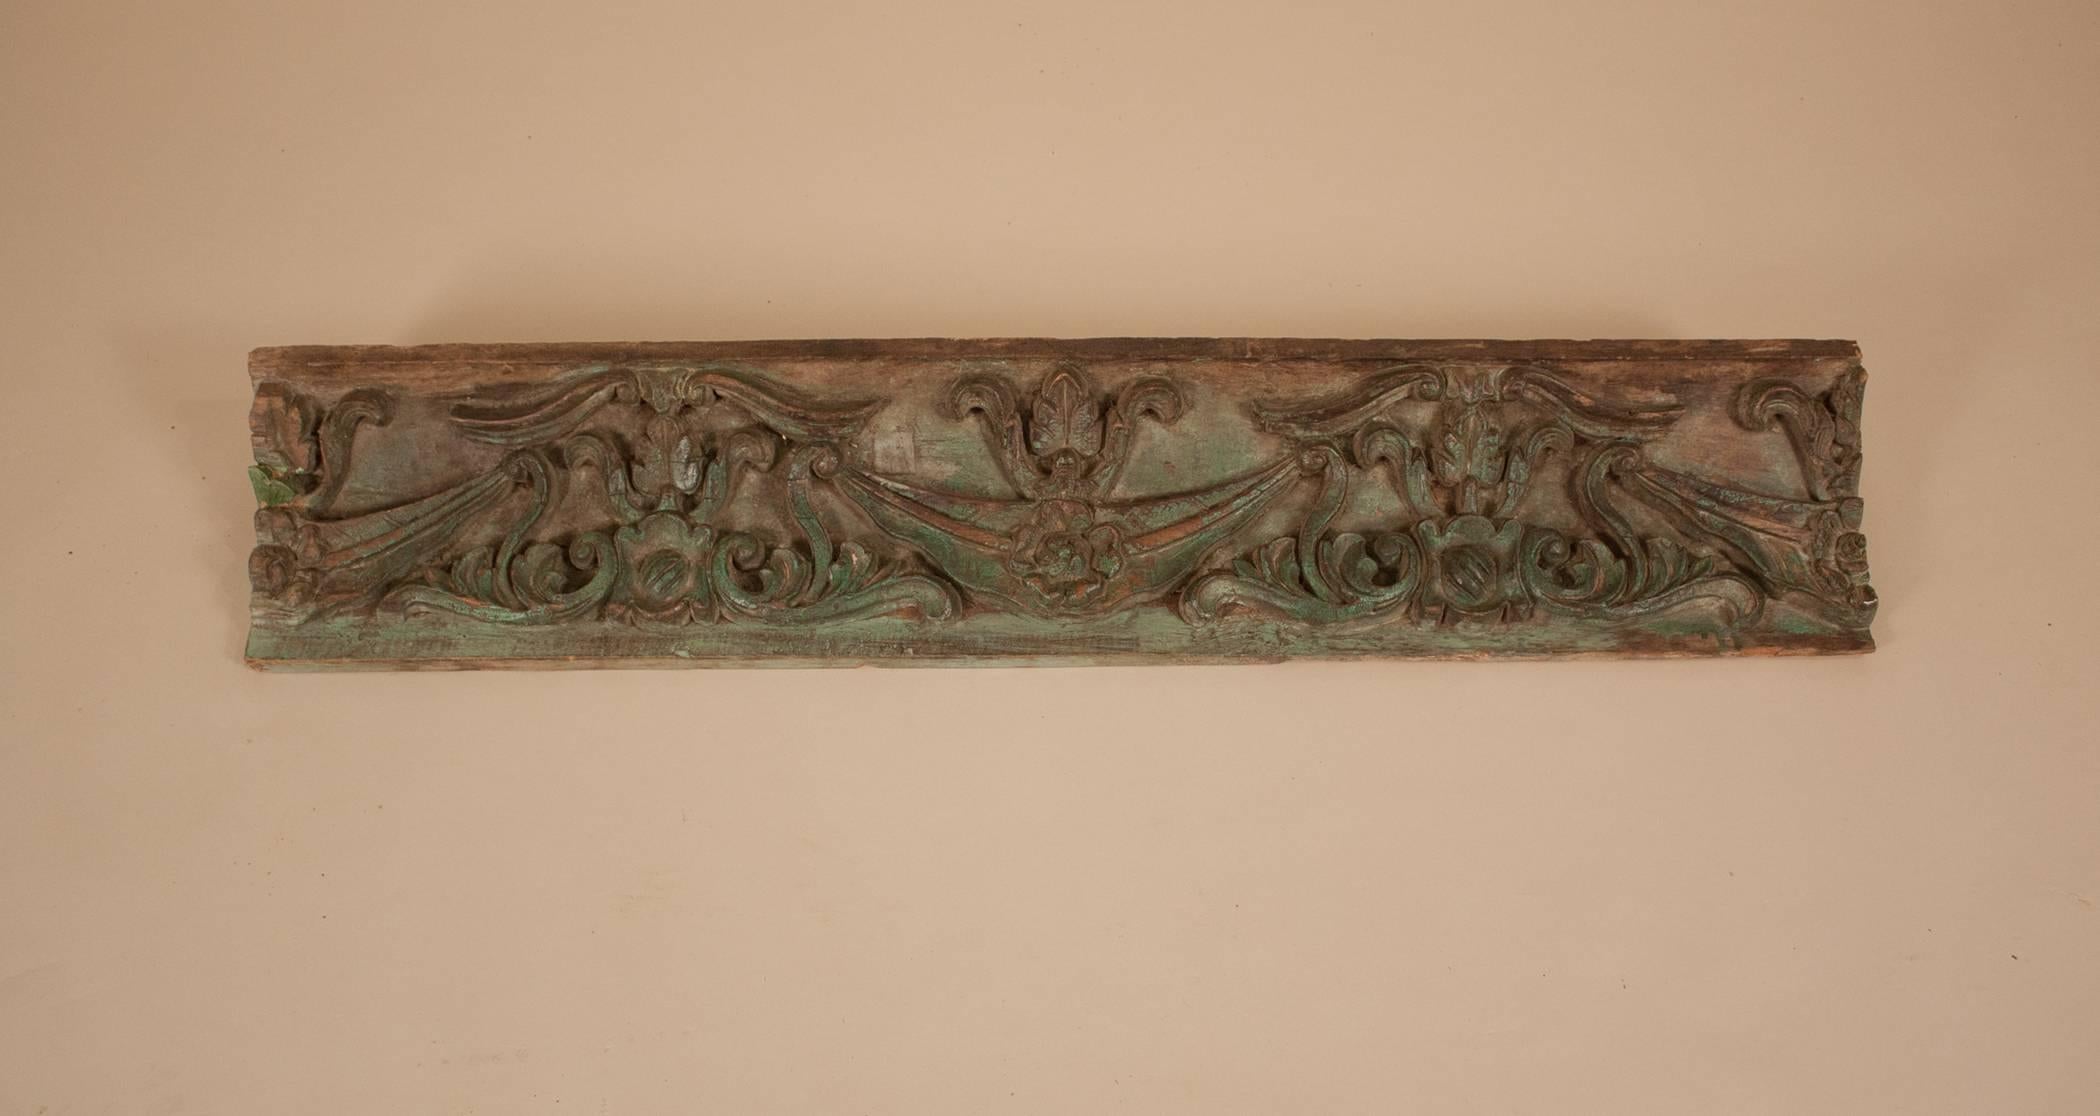 This teak wood architectural panel is carved in deep relief and has its original green paint. Originally a piece of ceiling molding, the fragment was salvaged from a haveli, or mansion, in British India.